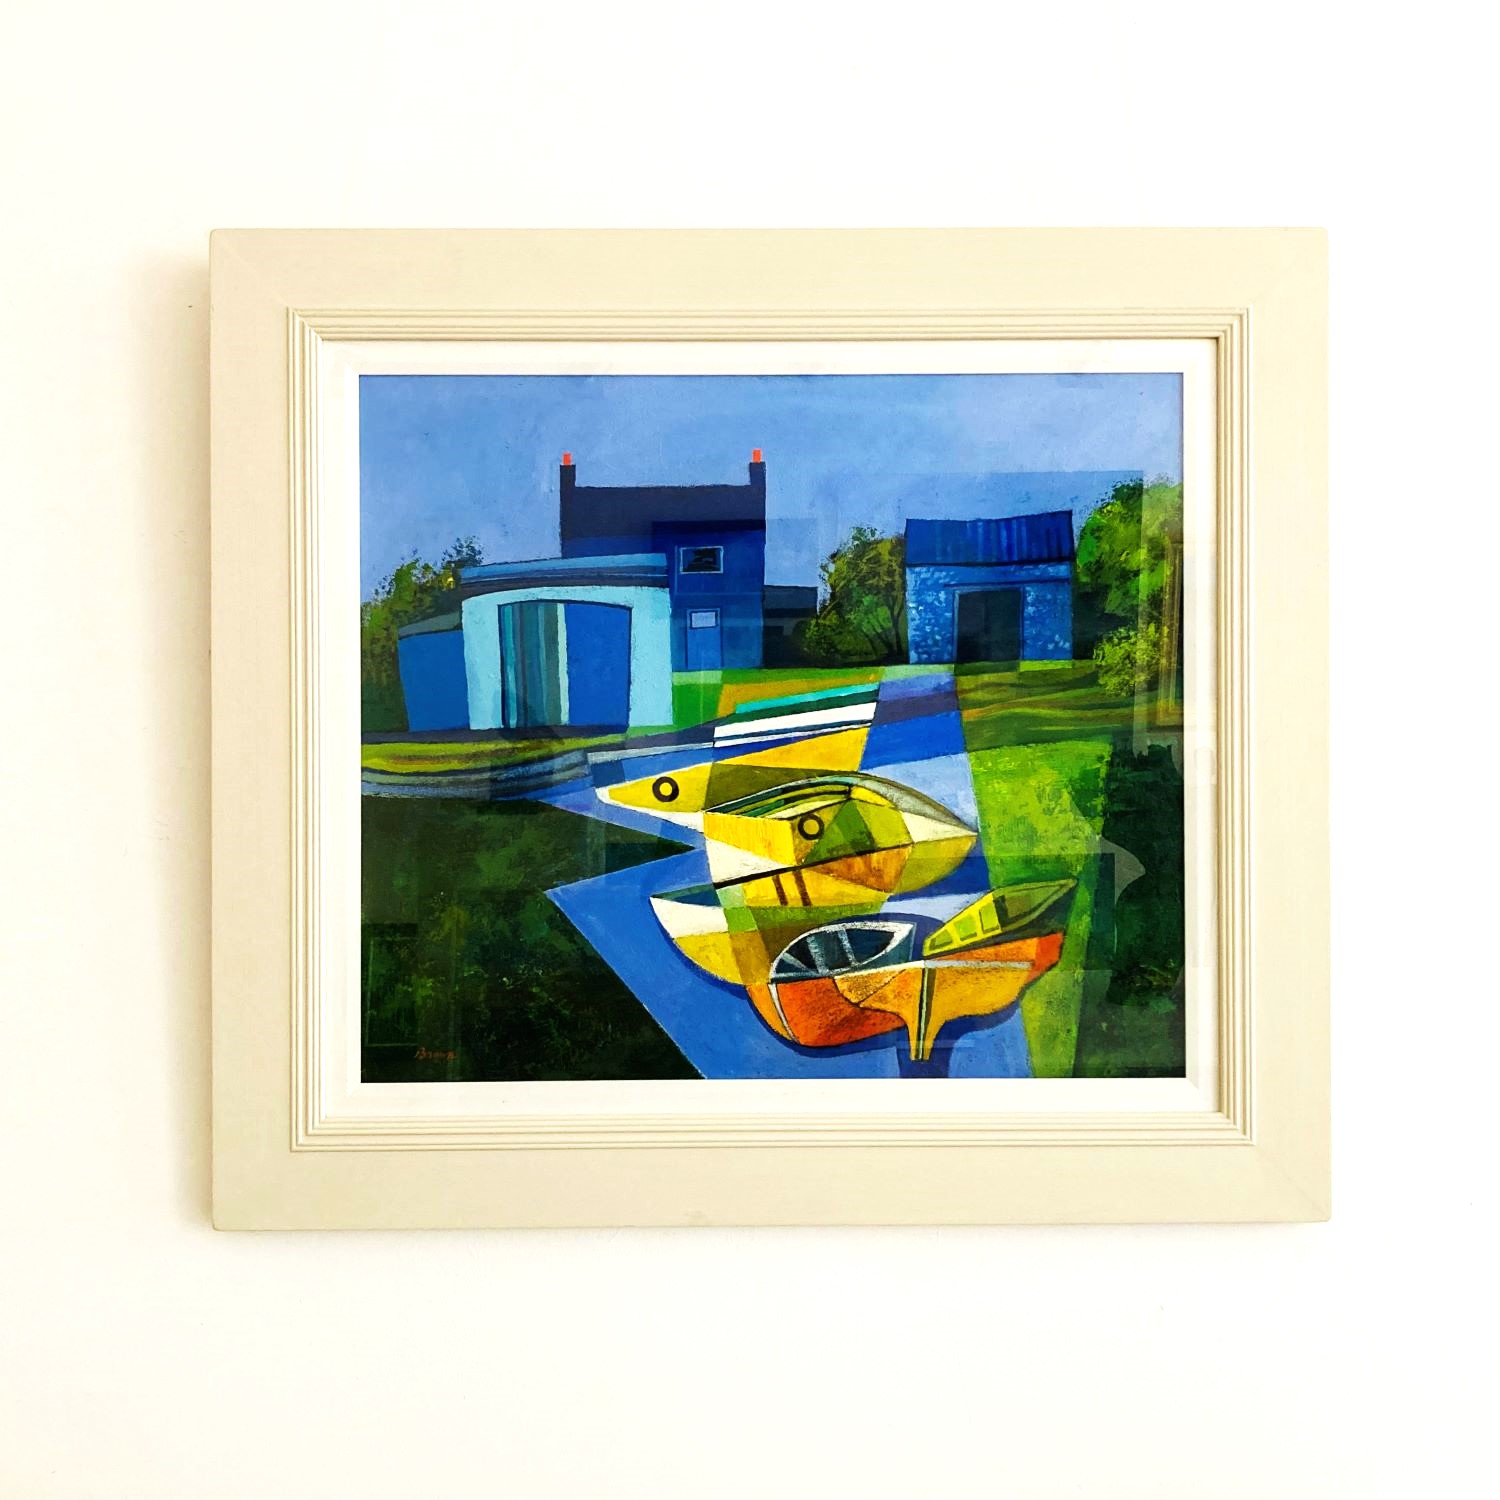 'Boats on the Slipway' by artist Davy Brown